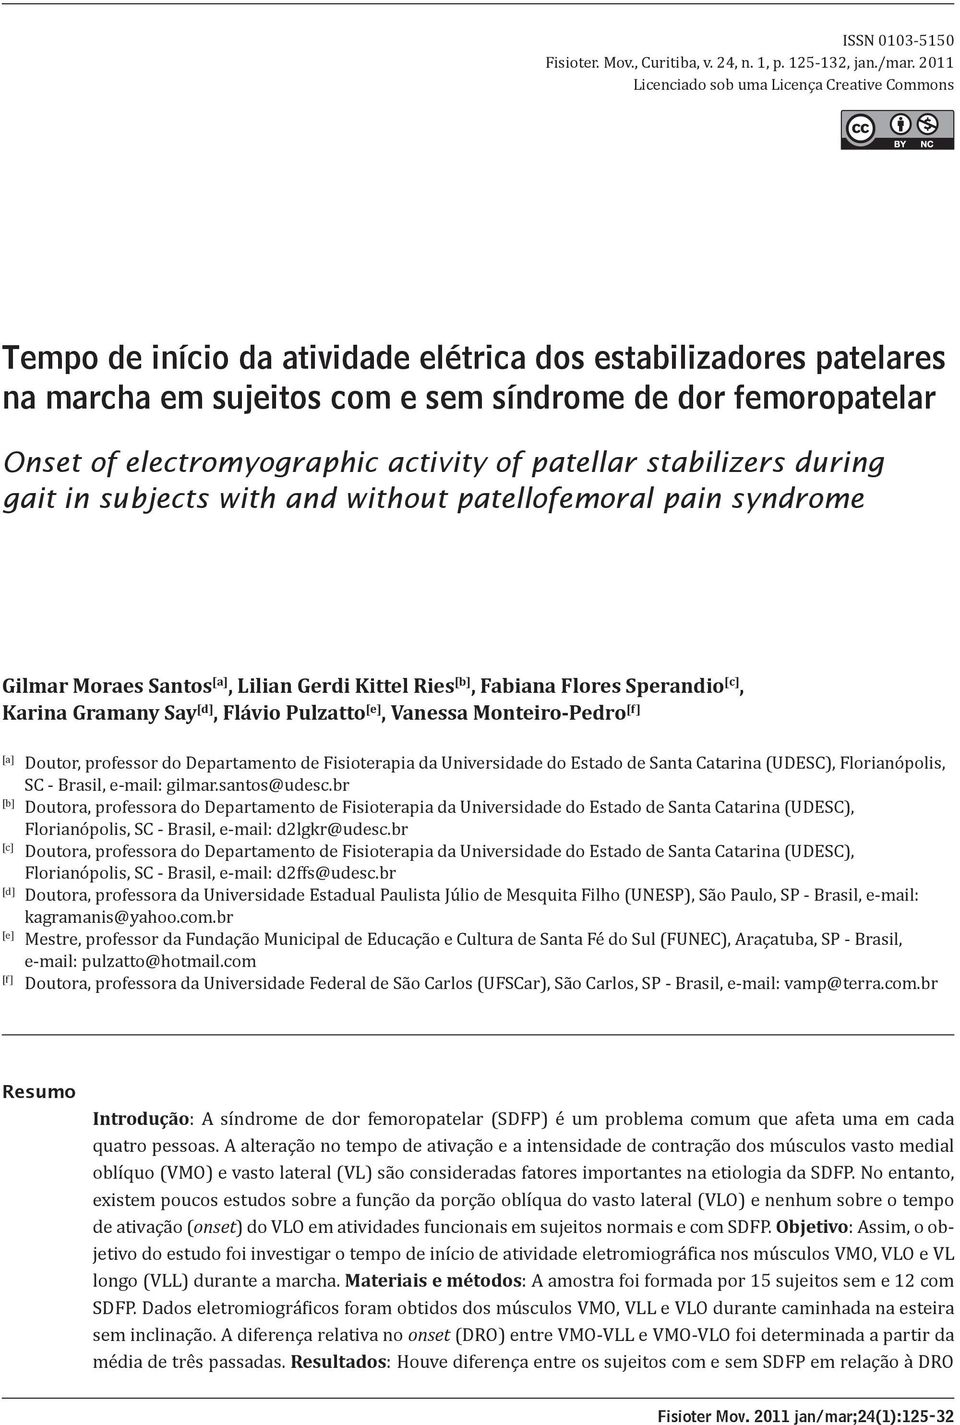 electromyographic activity of patellar stabilizers during gait in subjects with and without patellofemoral pain syndrome [A] Gilmar Moraes Santos [a], Lilian Gerdi Kittel Ries [b], Fabiana Flores